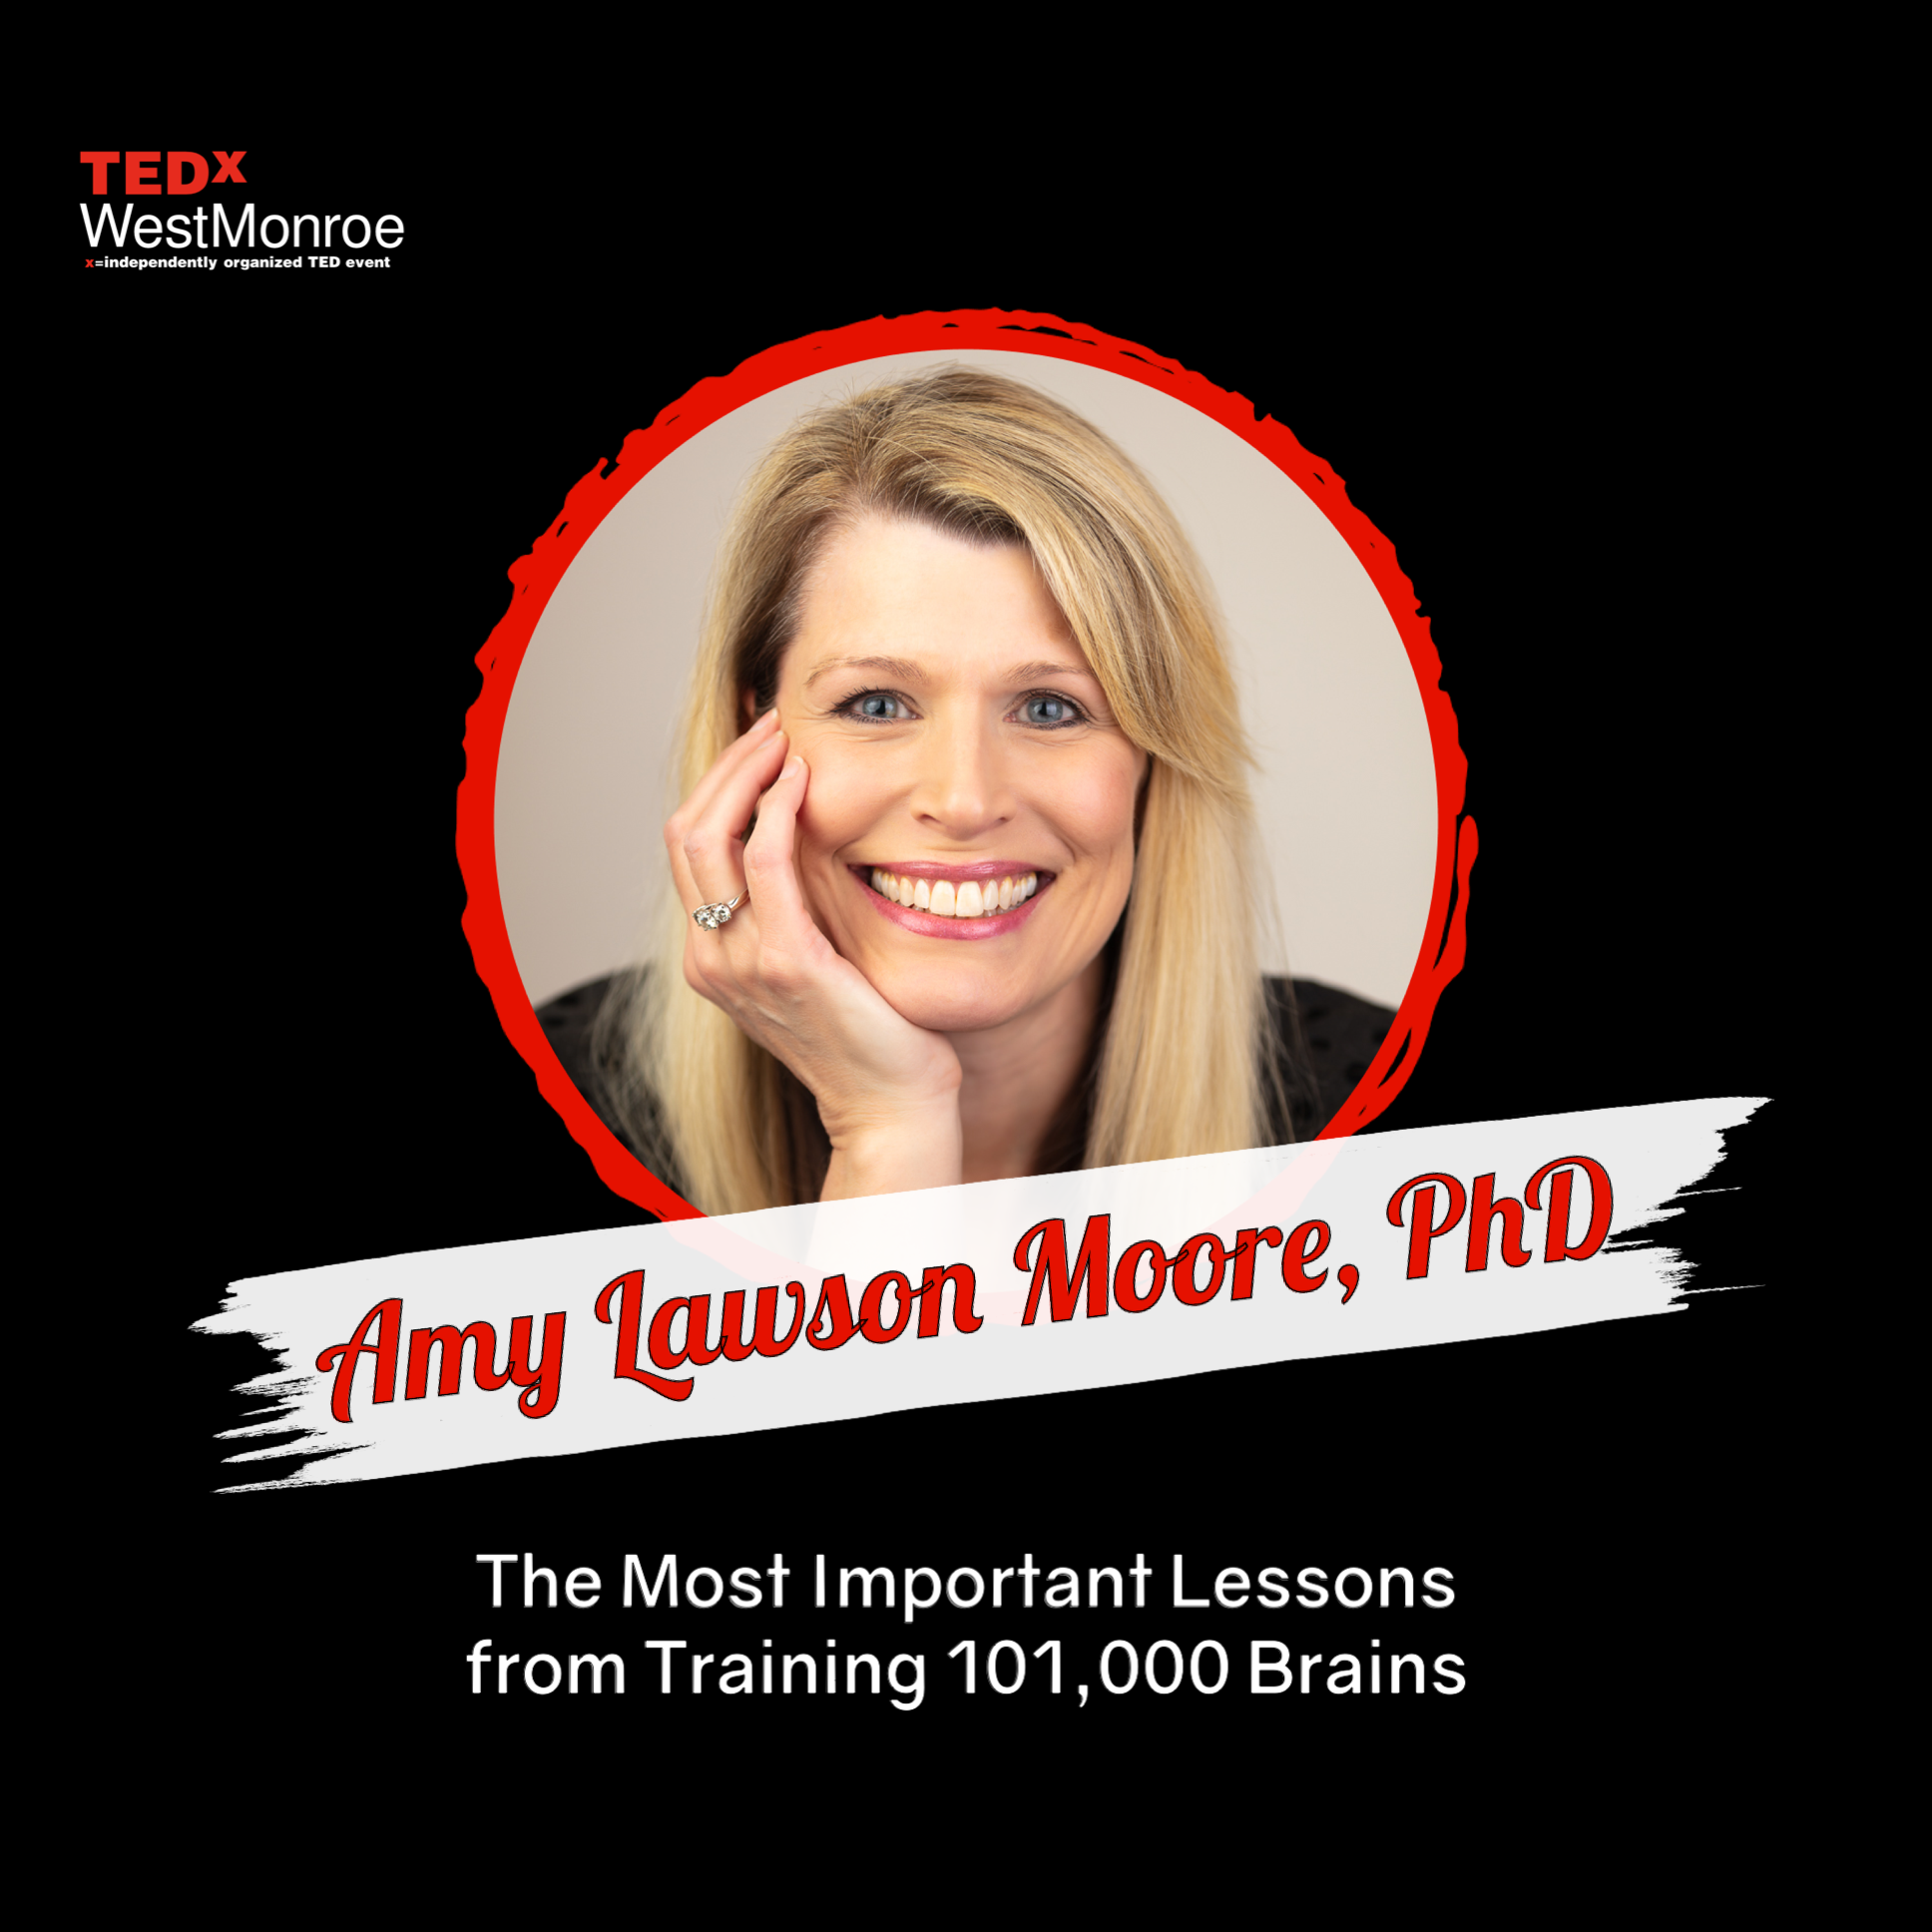 What We Learned from Training 101,000 Brains